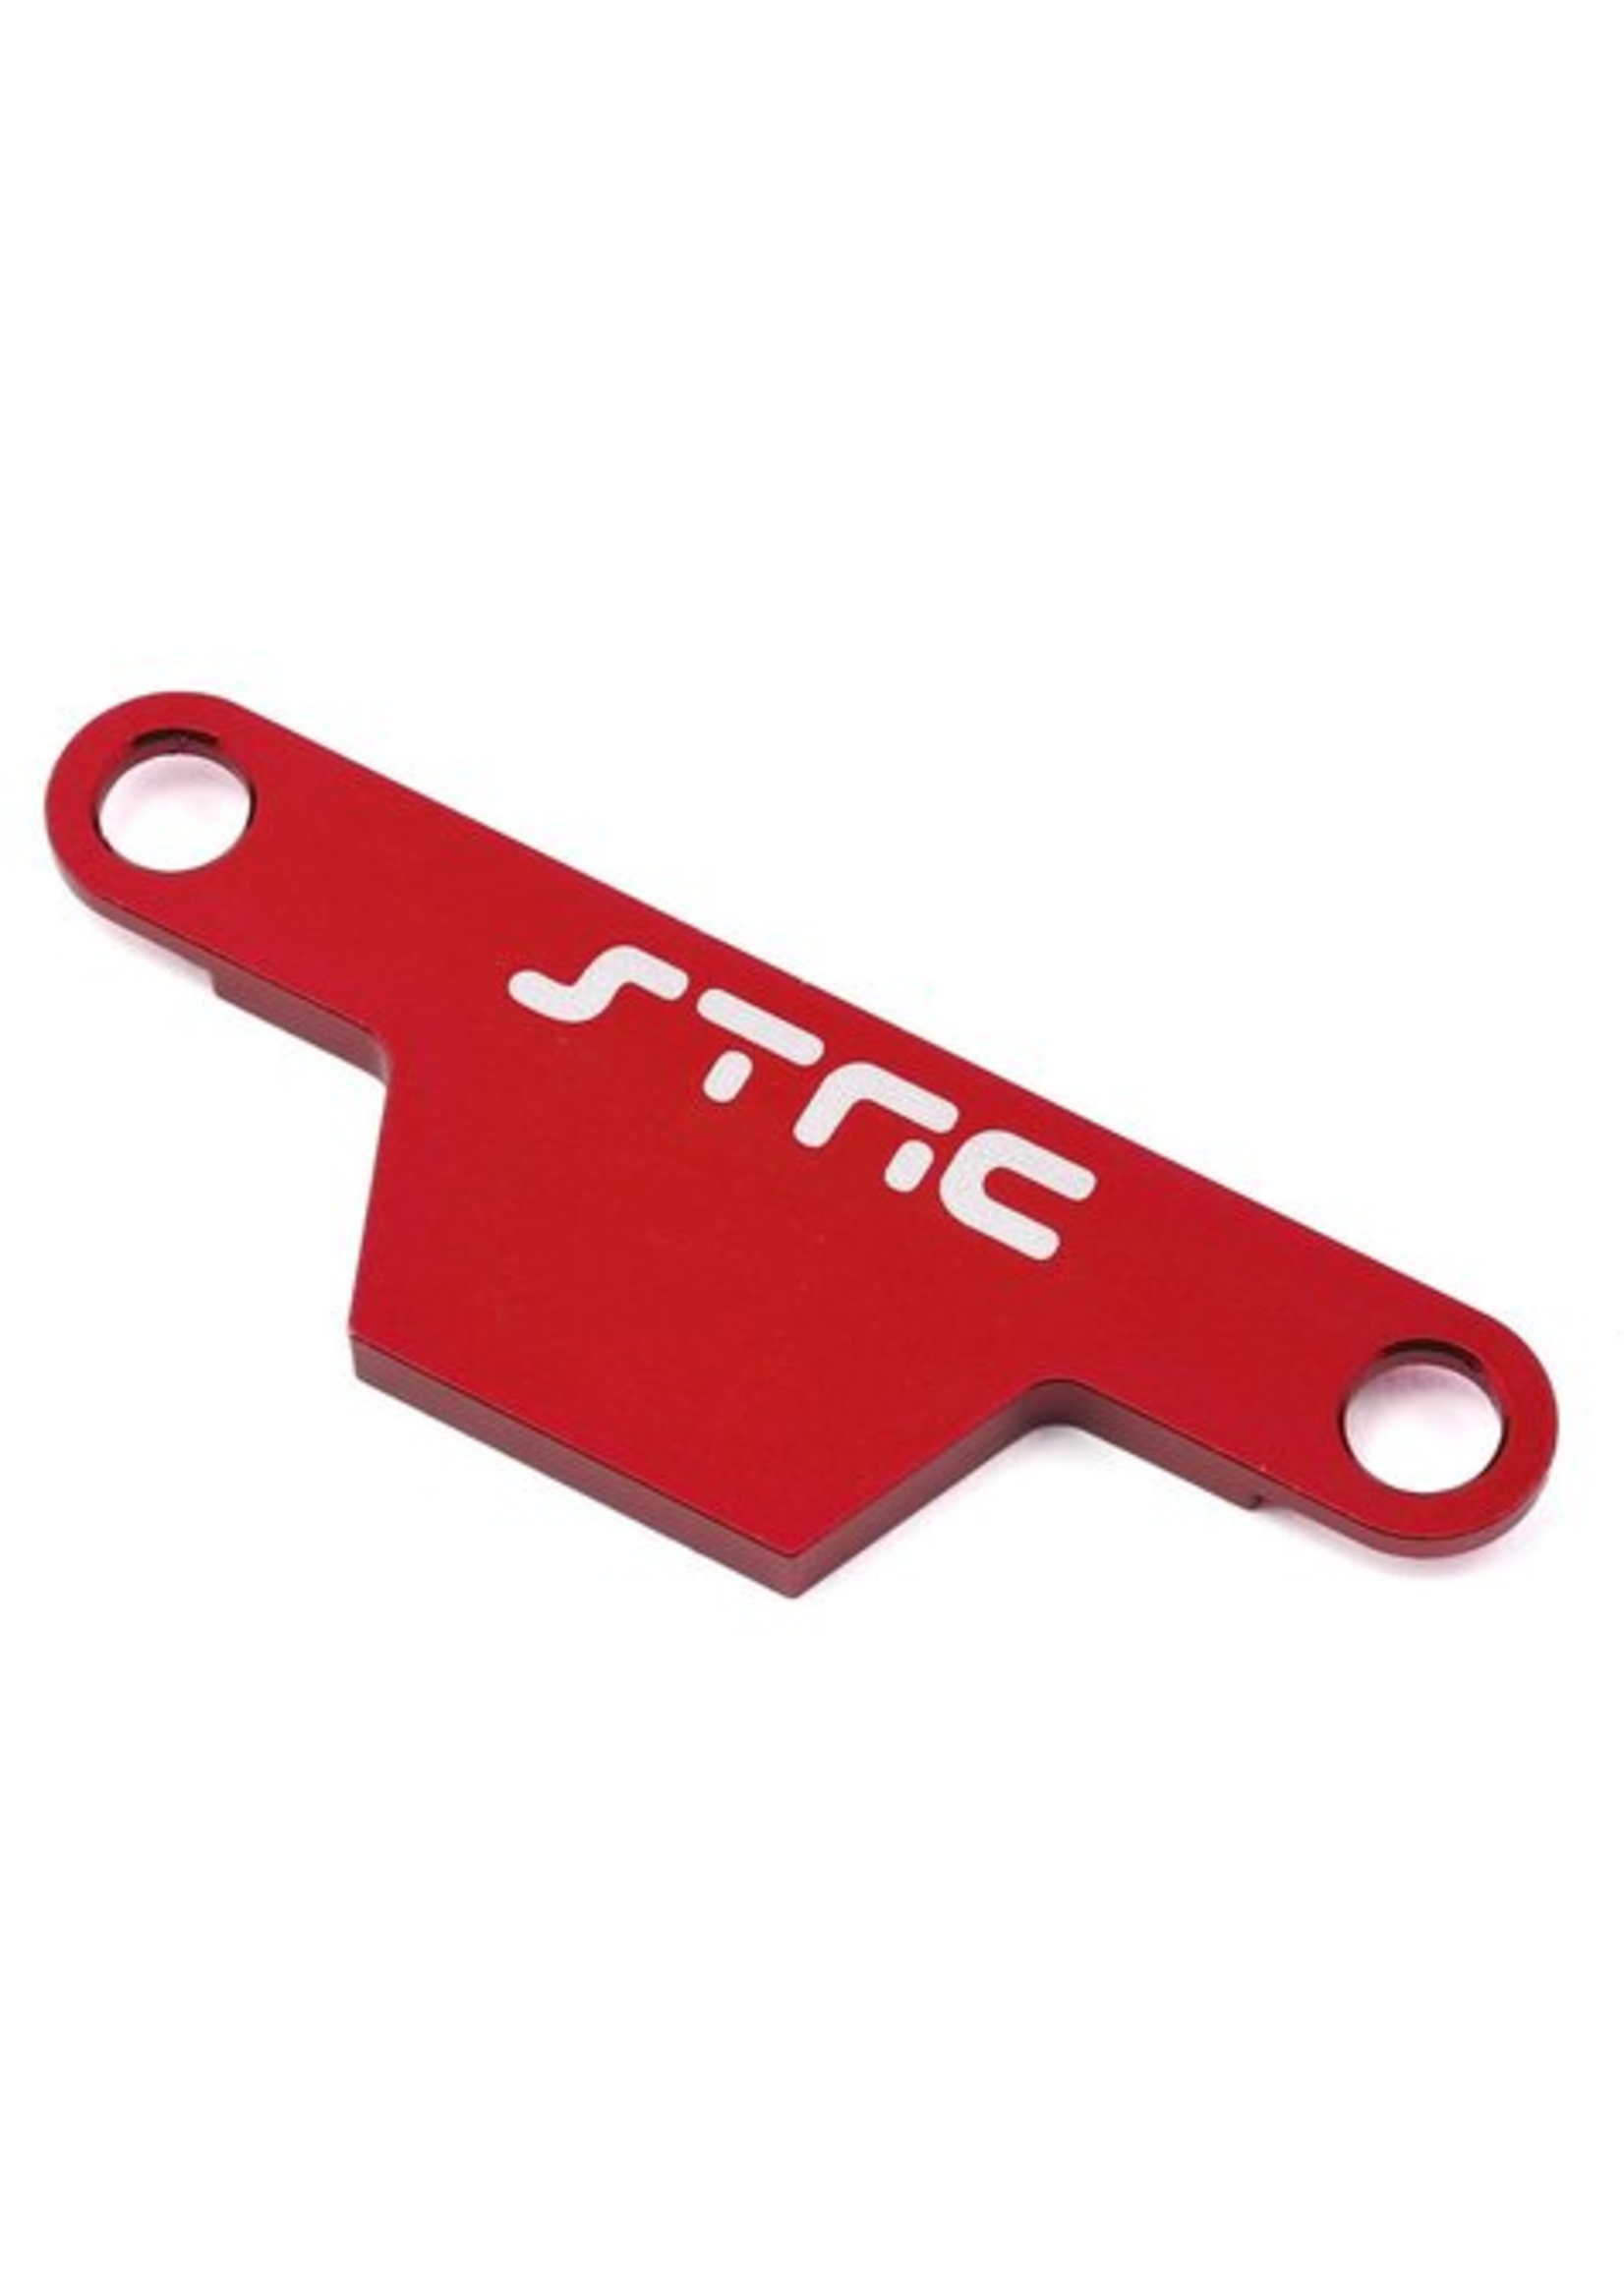 ST Racing Concepts SPTST3727AR ST Racing Concepts CNC Machined Alum. Battery Hold-down Plate for Rustler/Bandit (Red)